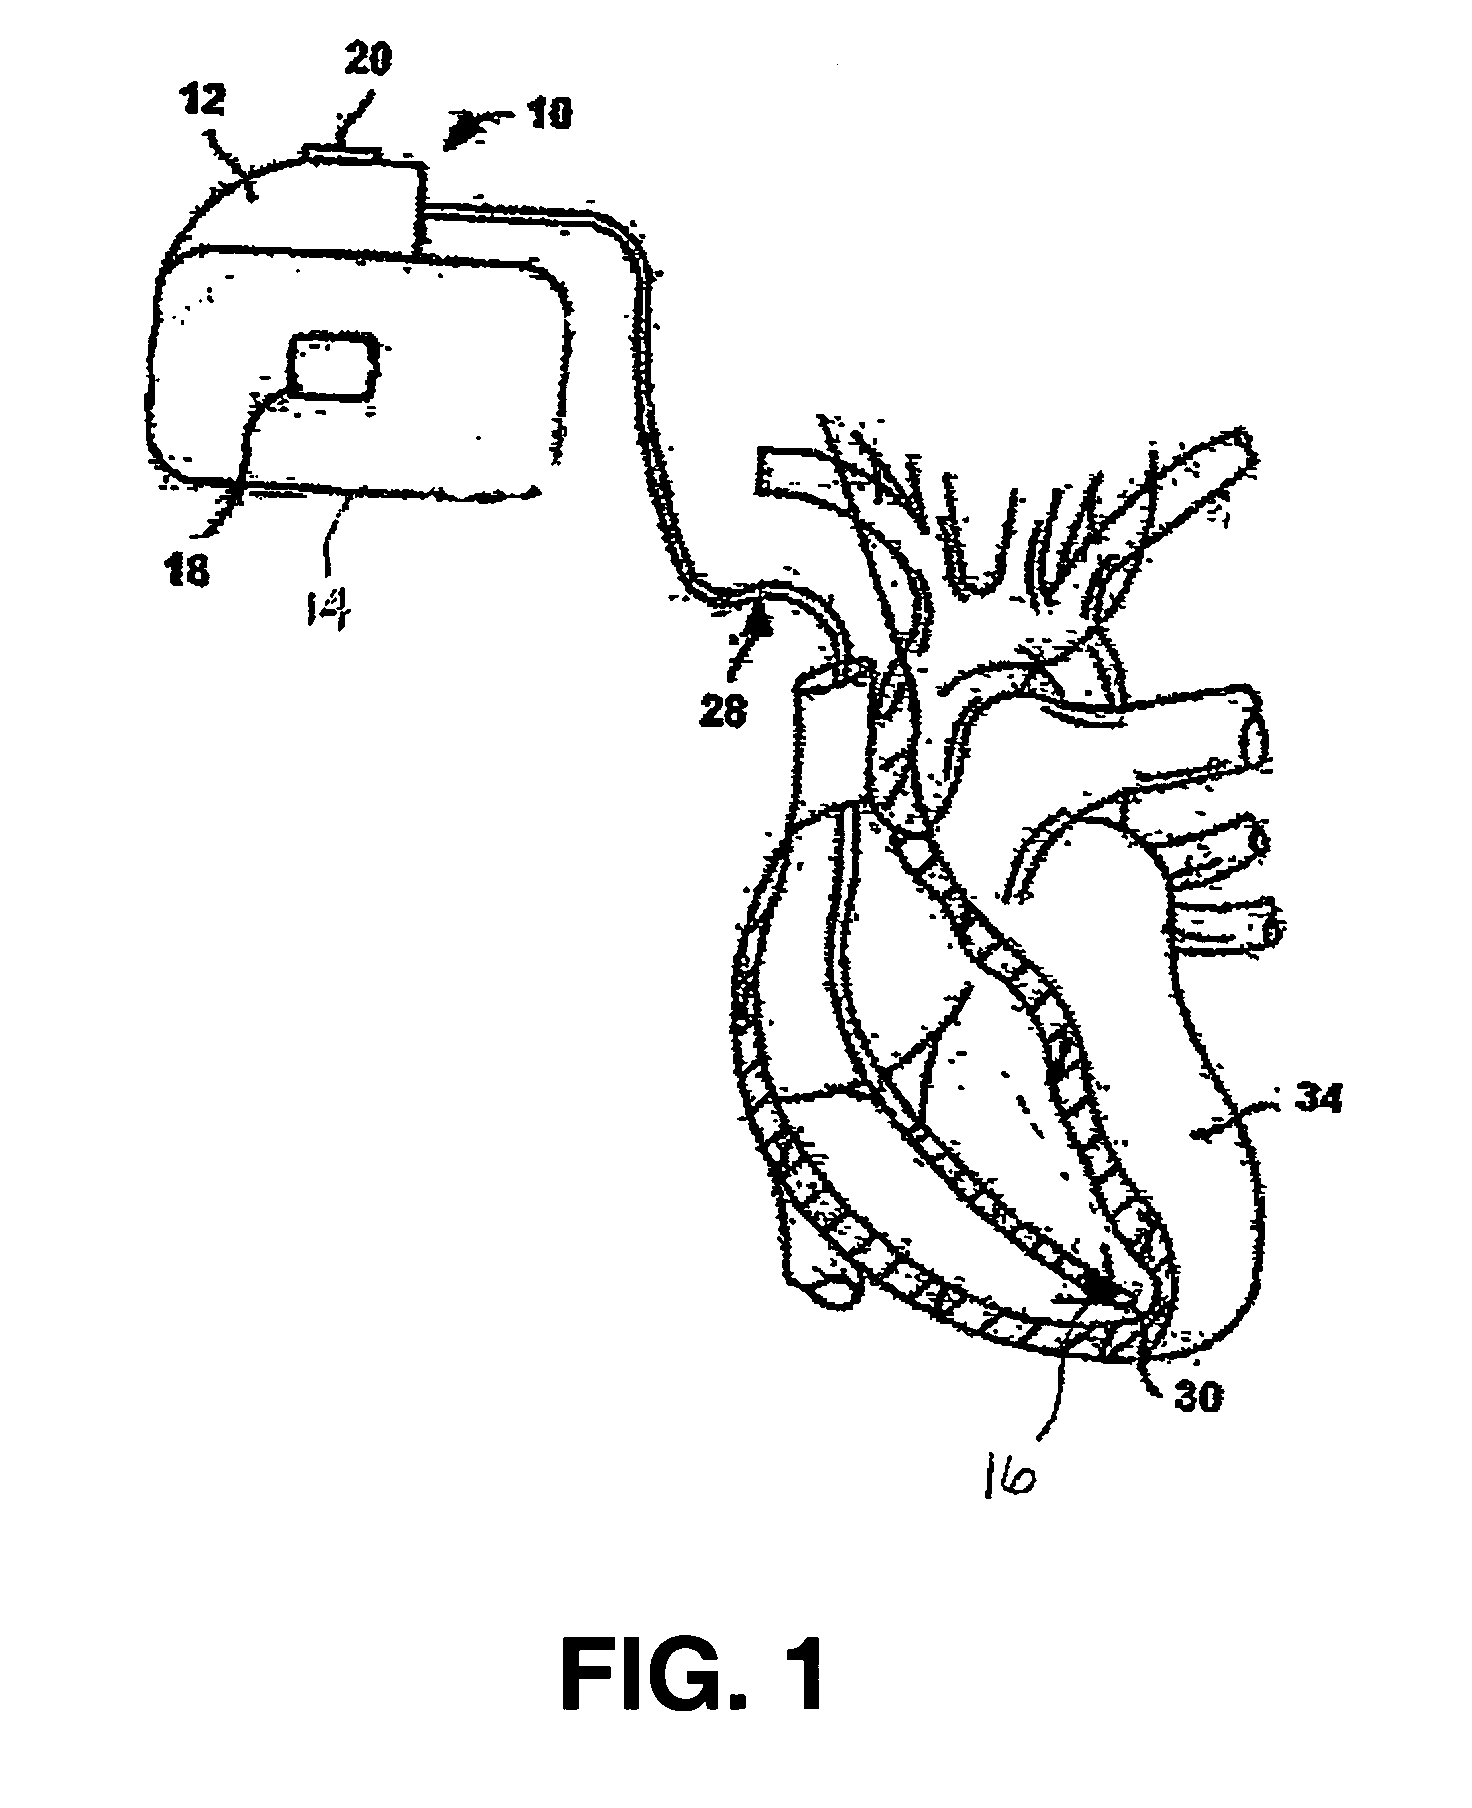 Method and apparatus to provide diagnostic index and therapy regulated by subject's autonomic nervous system